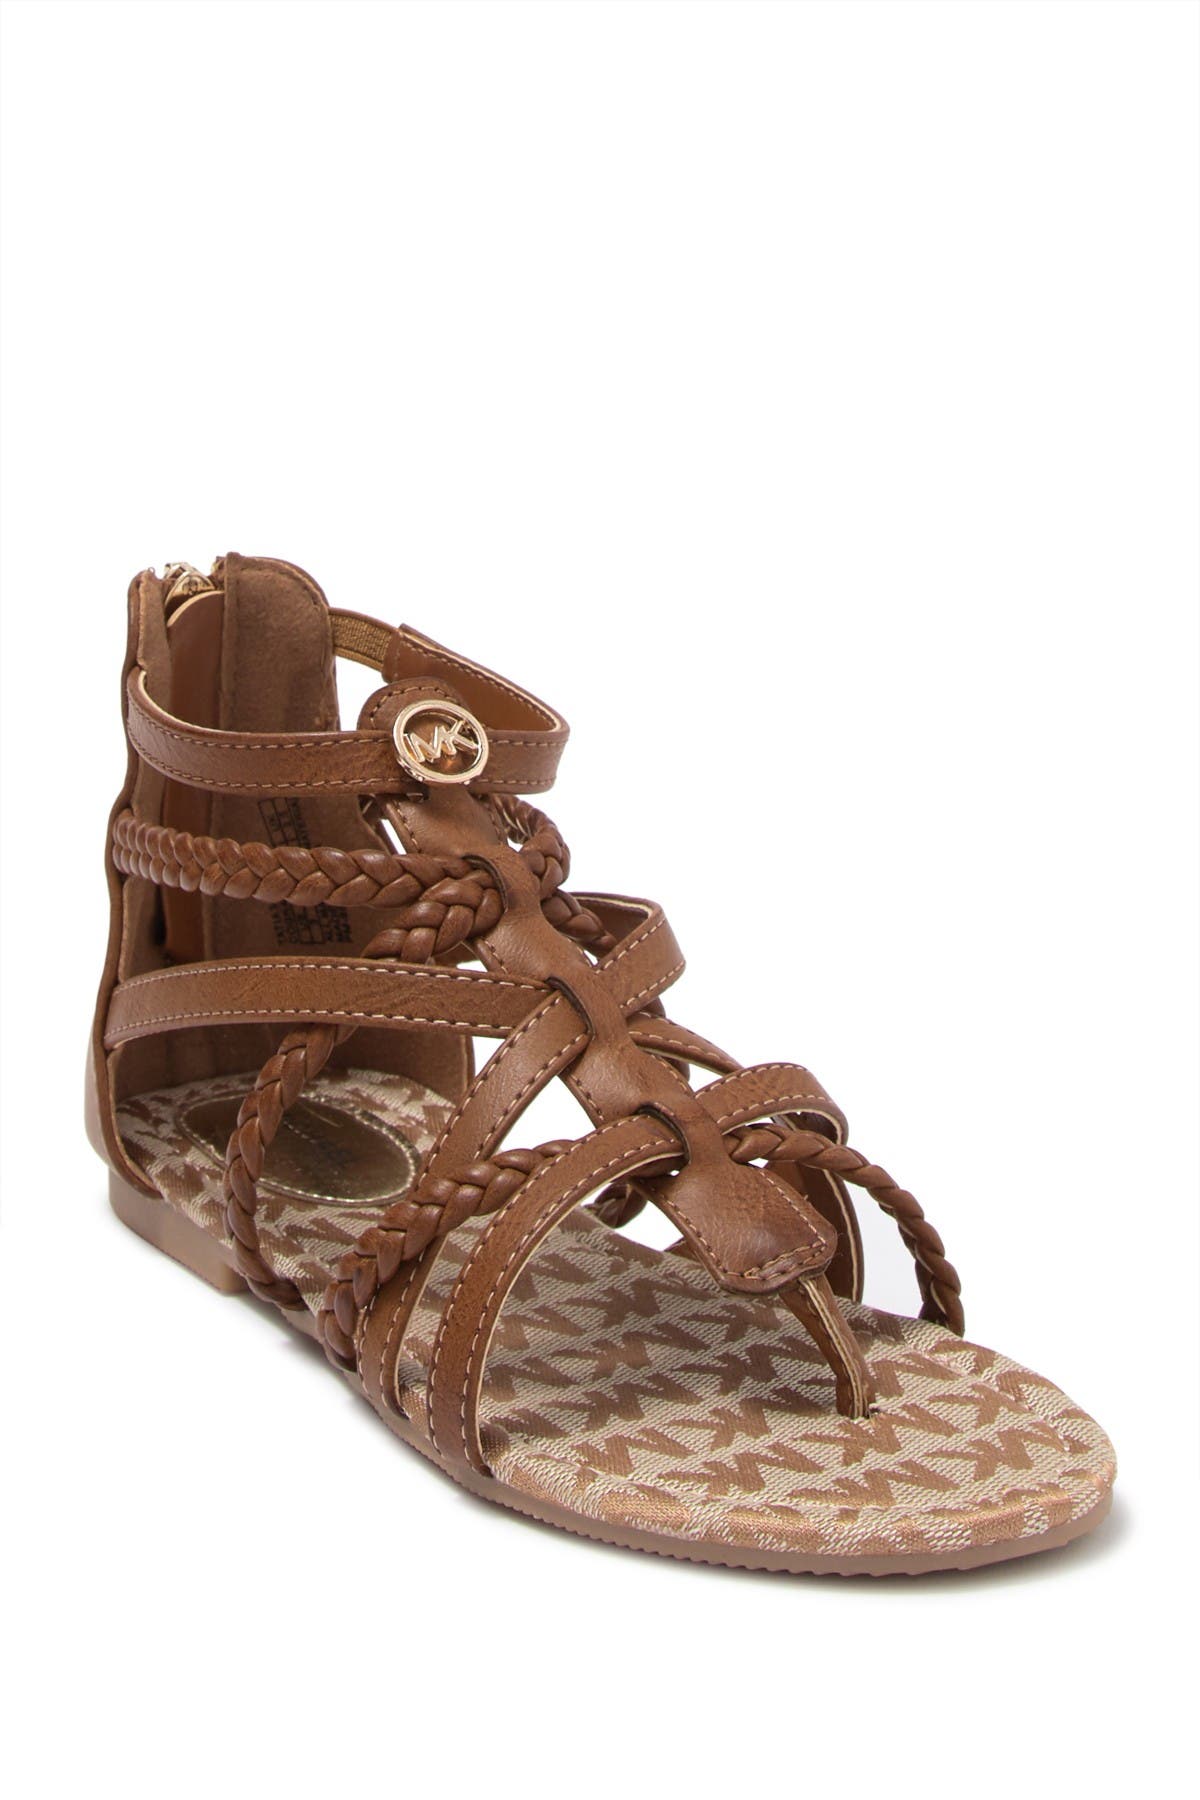 michael kors sandals for toddlers